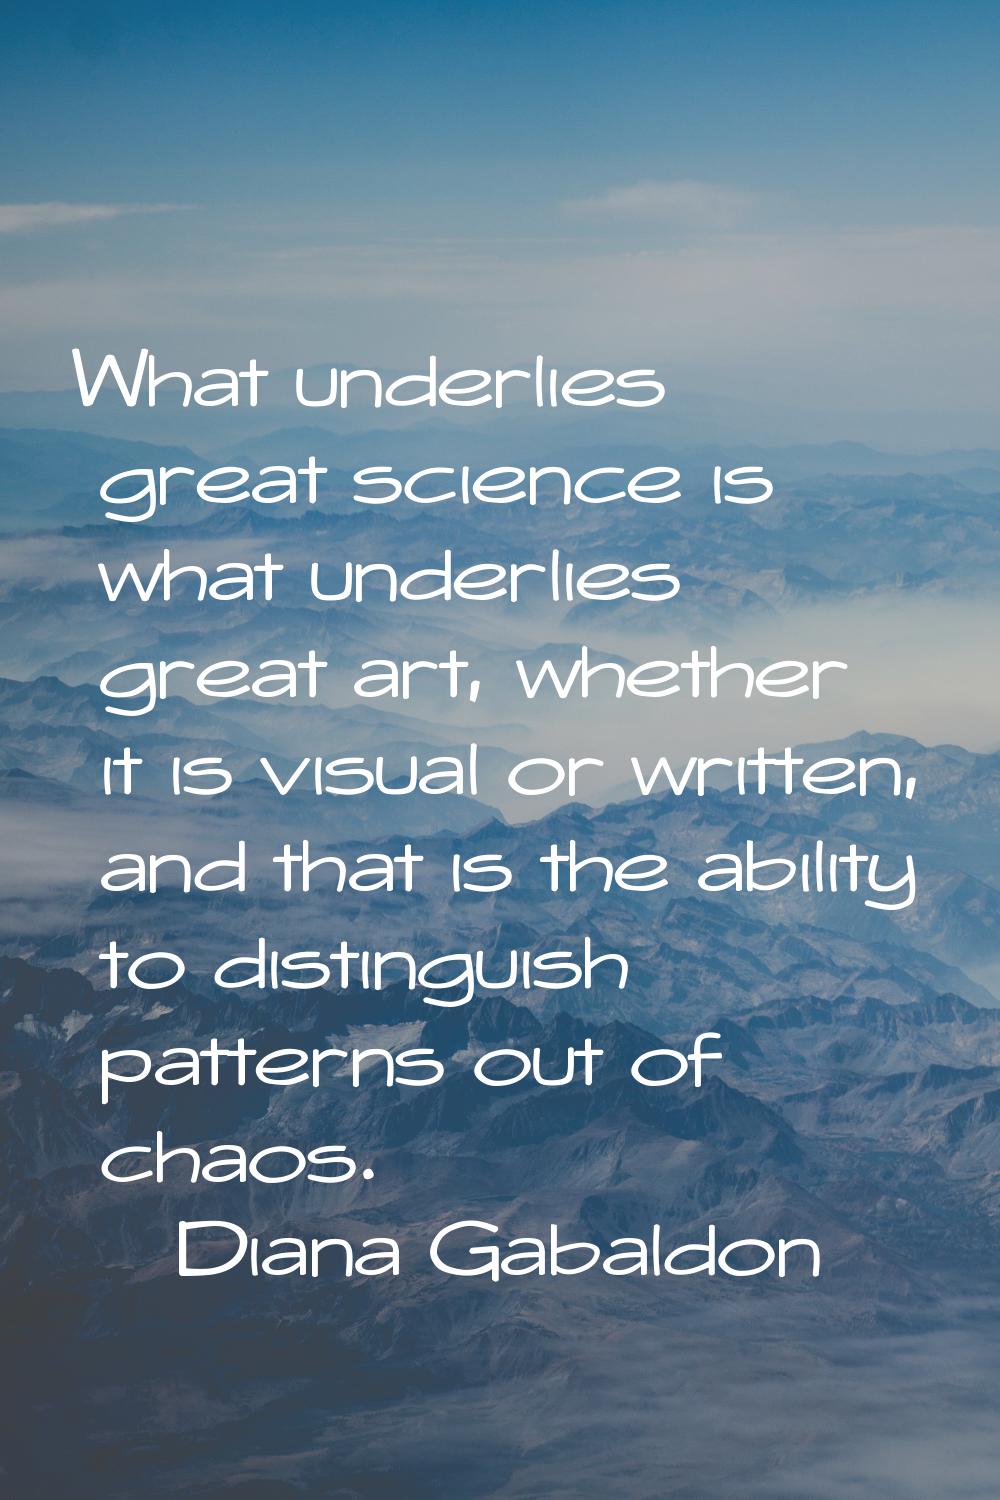 What underlies great science is what underlies great art, whether it is visual or written, and that